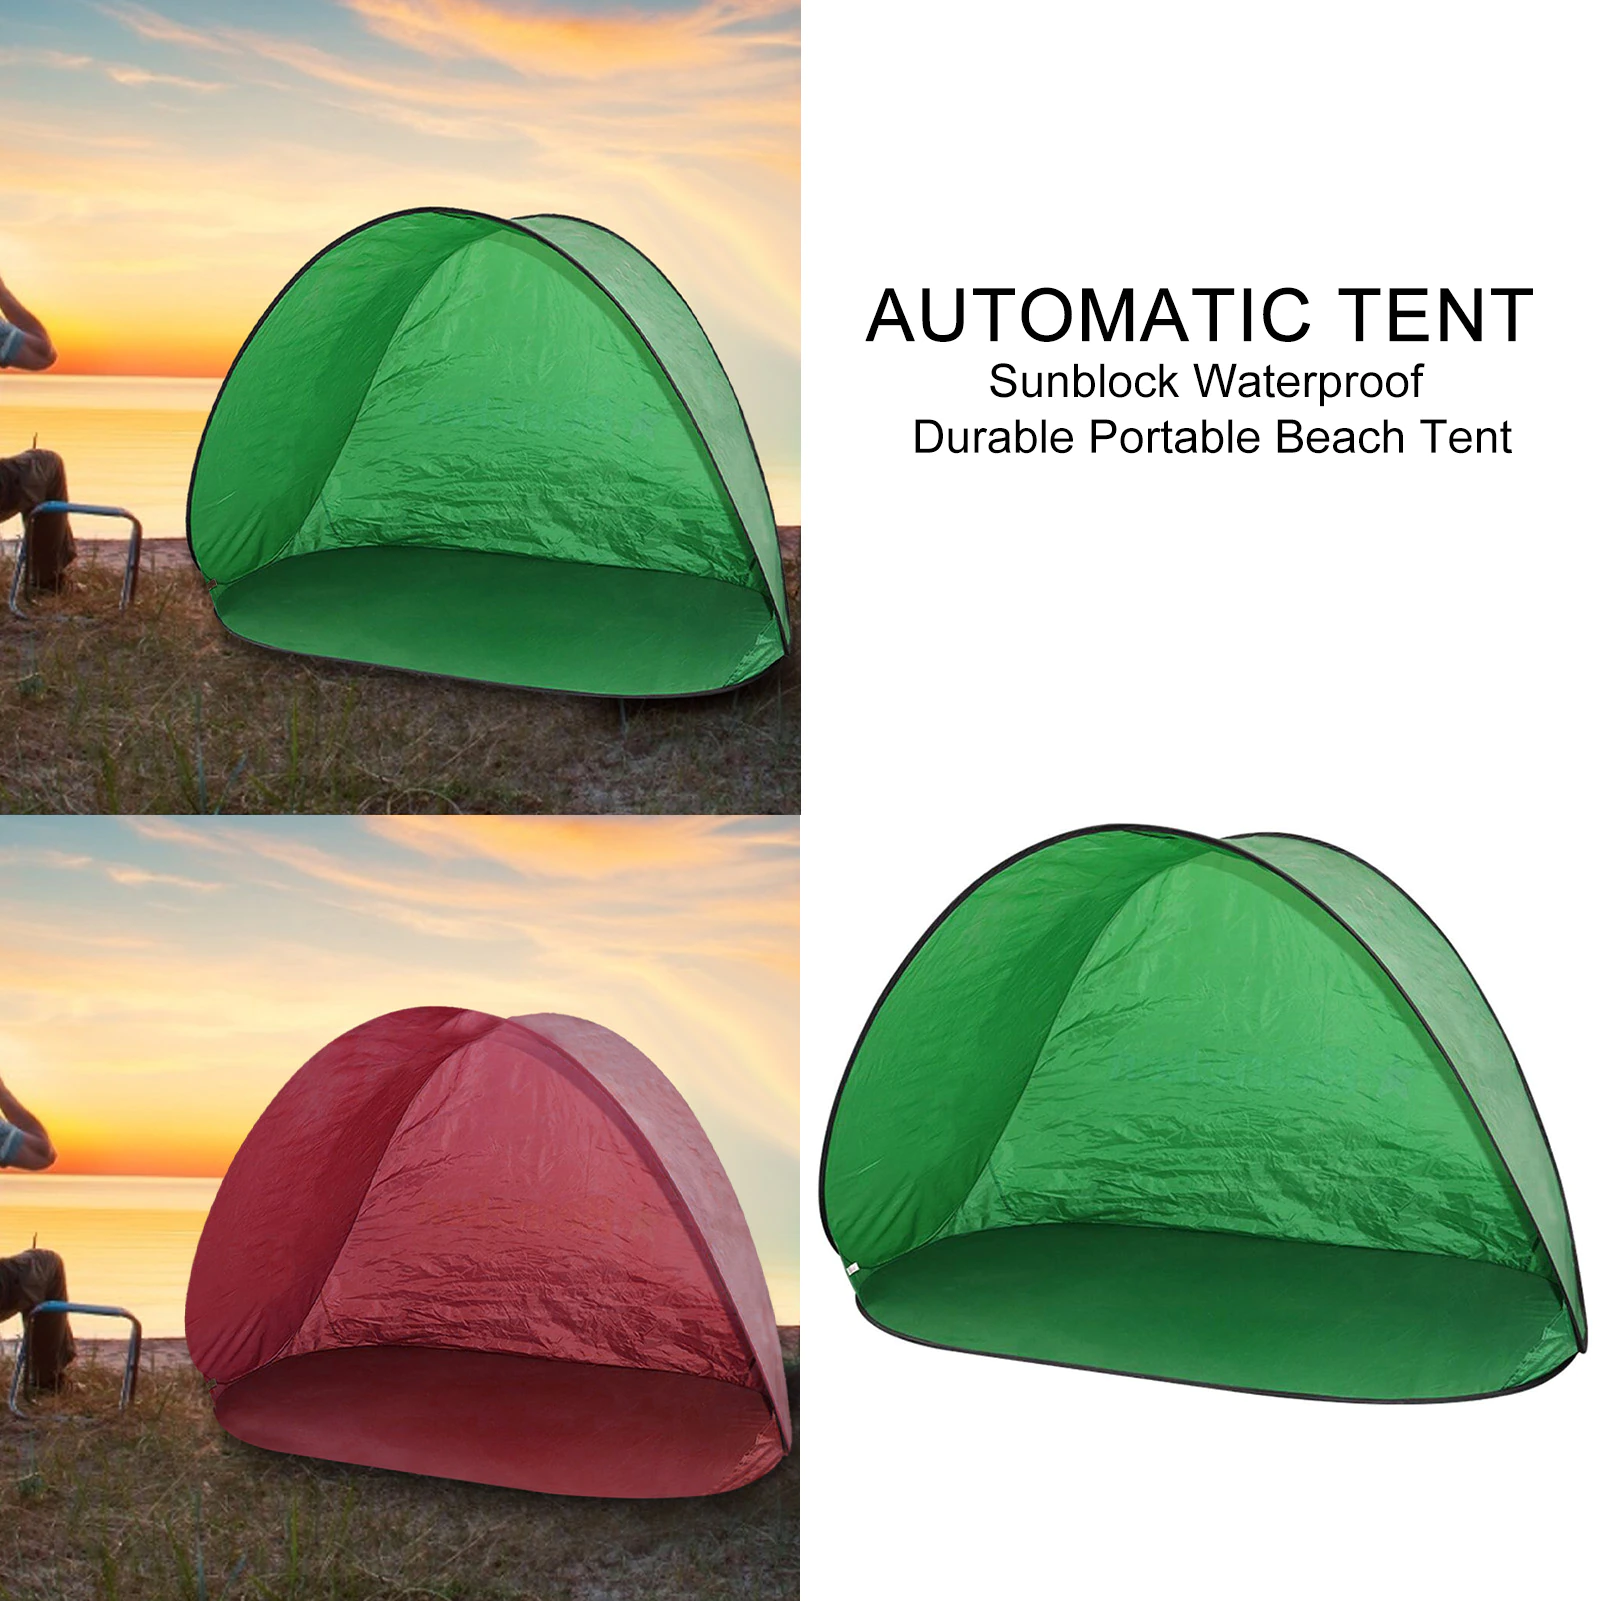 Cheap Goat Tents Automatic Tent Sunblock Waterproof Durable Portable Beach Tent Sun Shelters Uv Protection Pop Up Tents Sun Shade Awning Outdoor